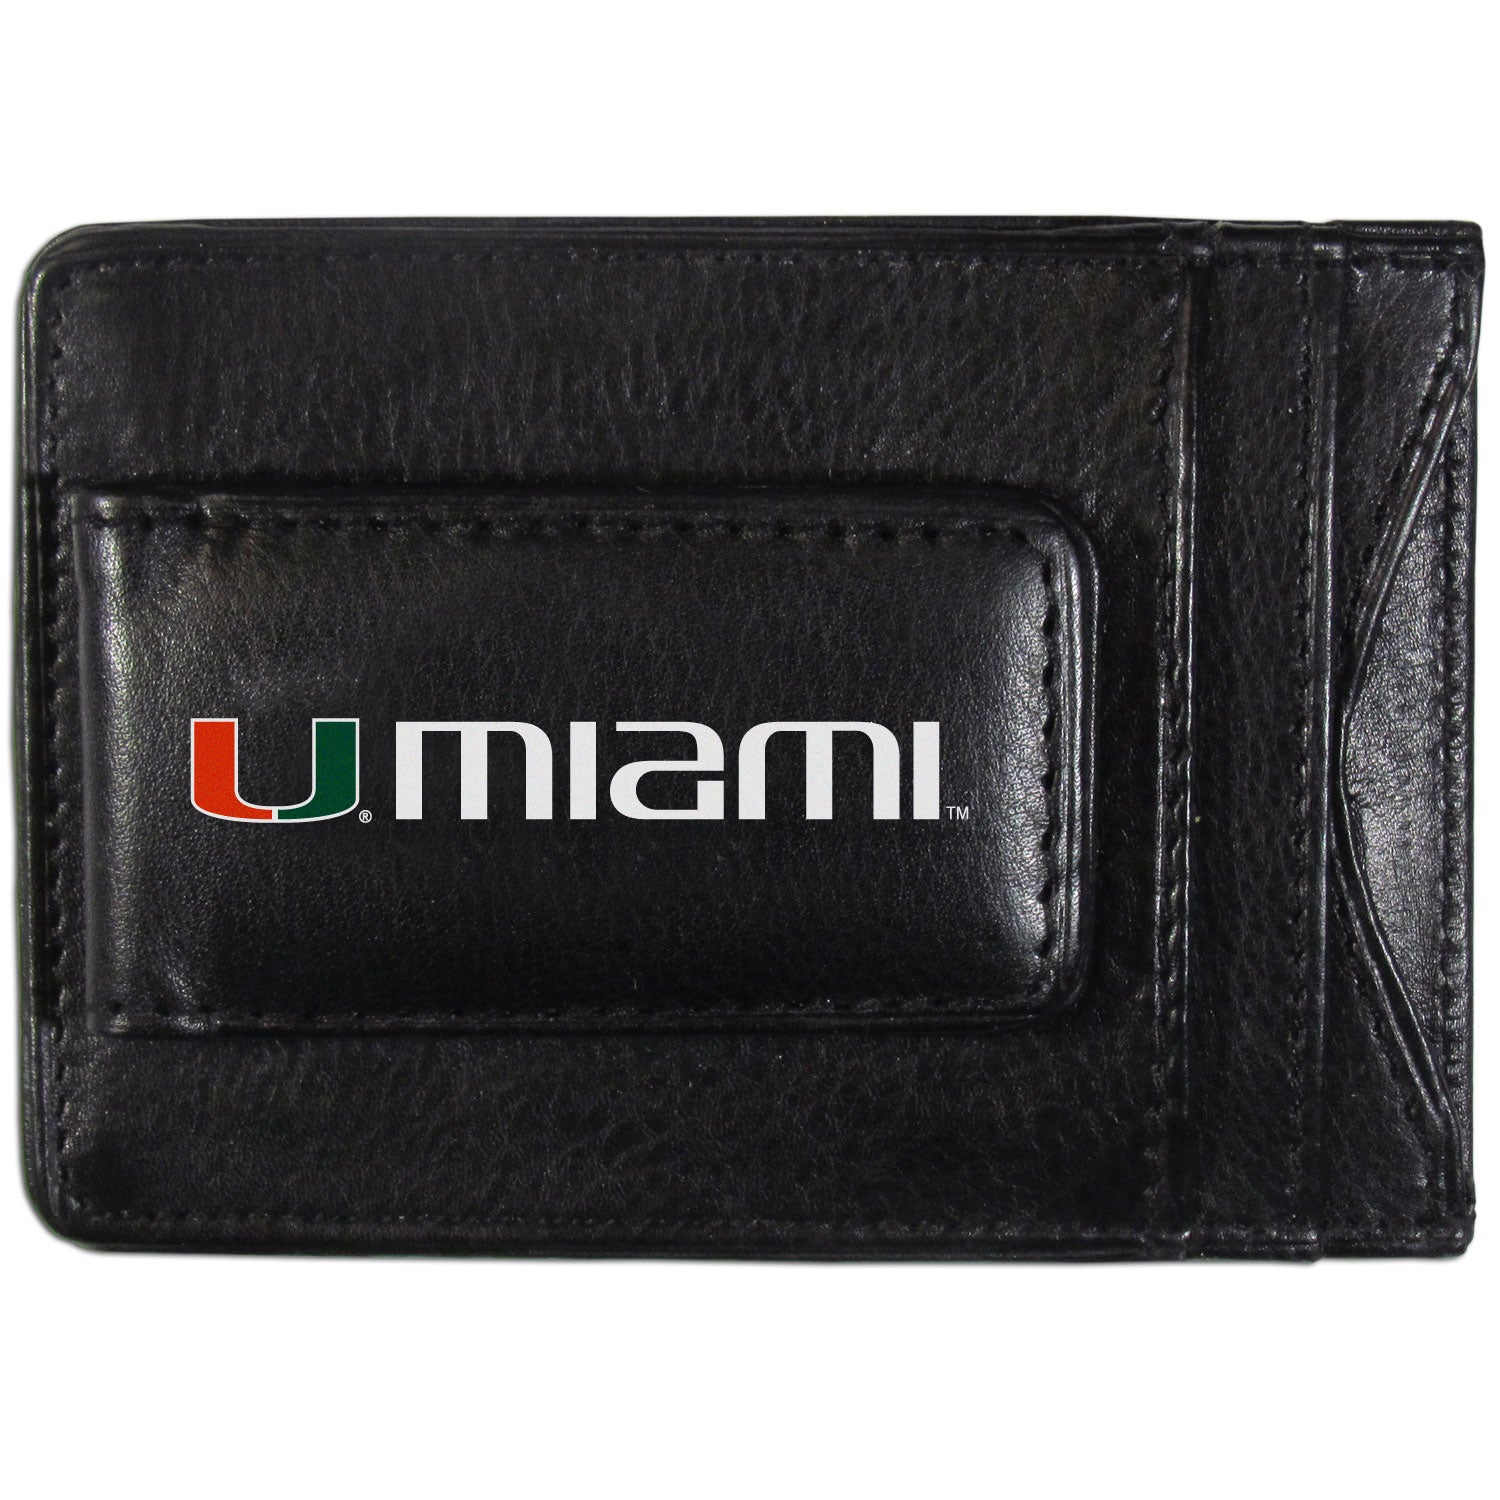 Miami Hurricanes Logo Leather Cash and Cardholder